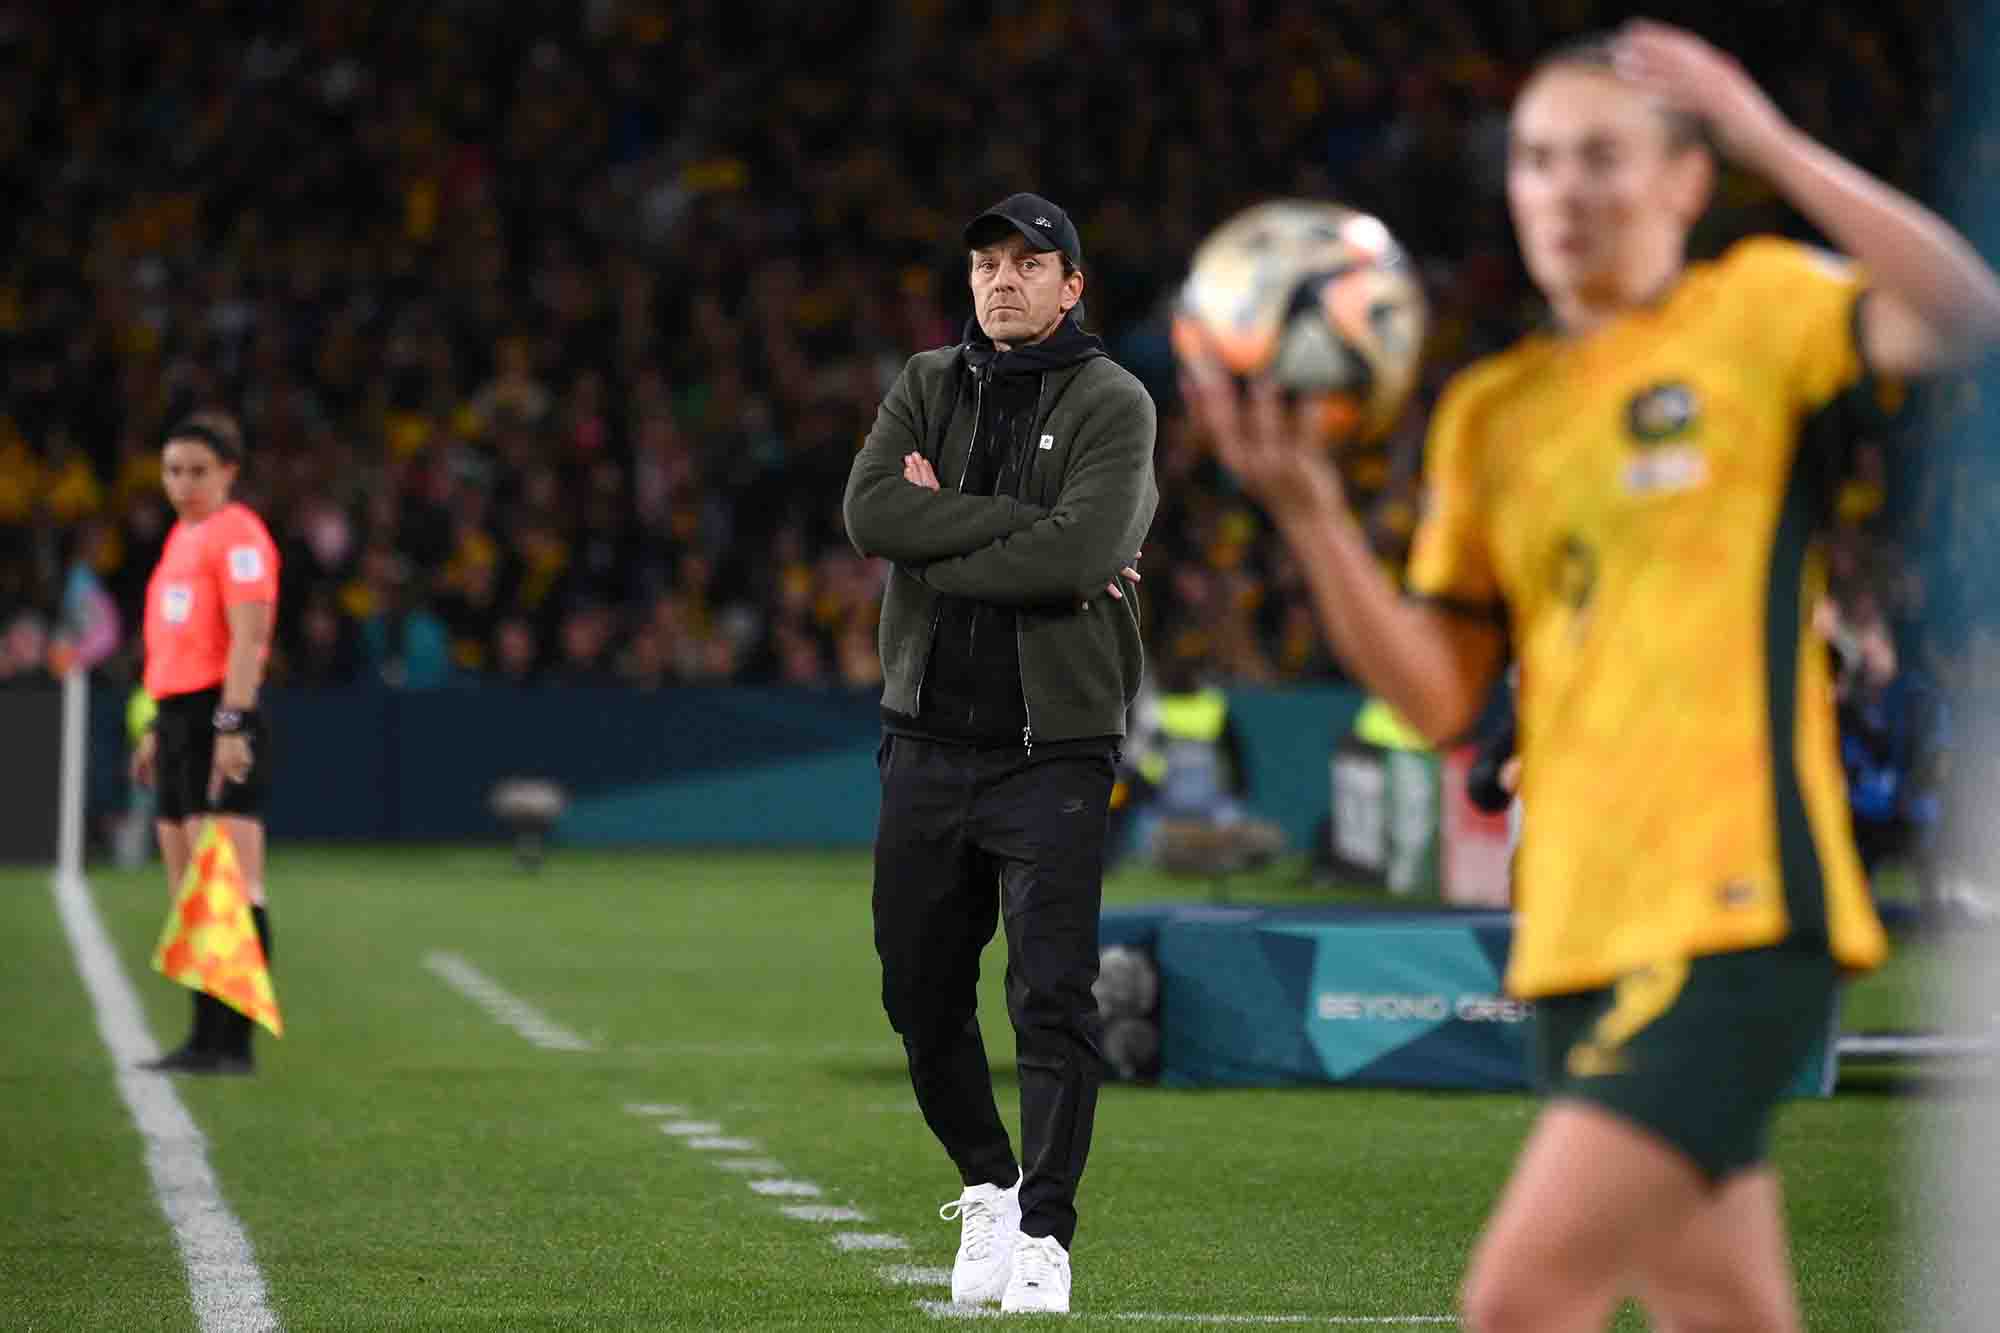 Australia coach Tony Gustavsson watches from the sidelines as his team faces England.